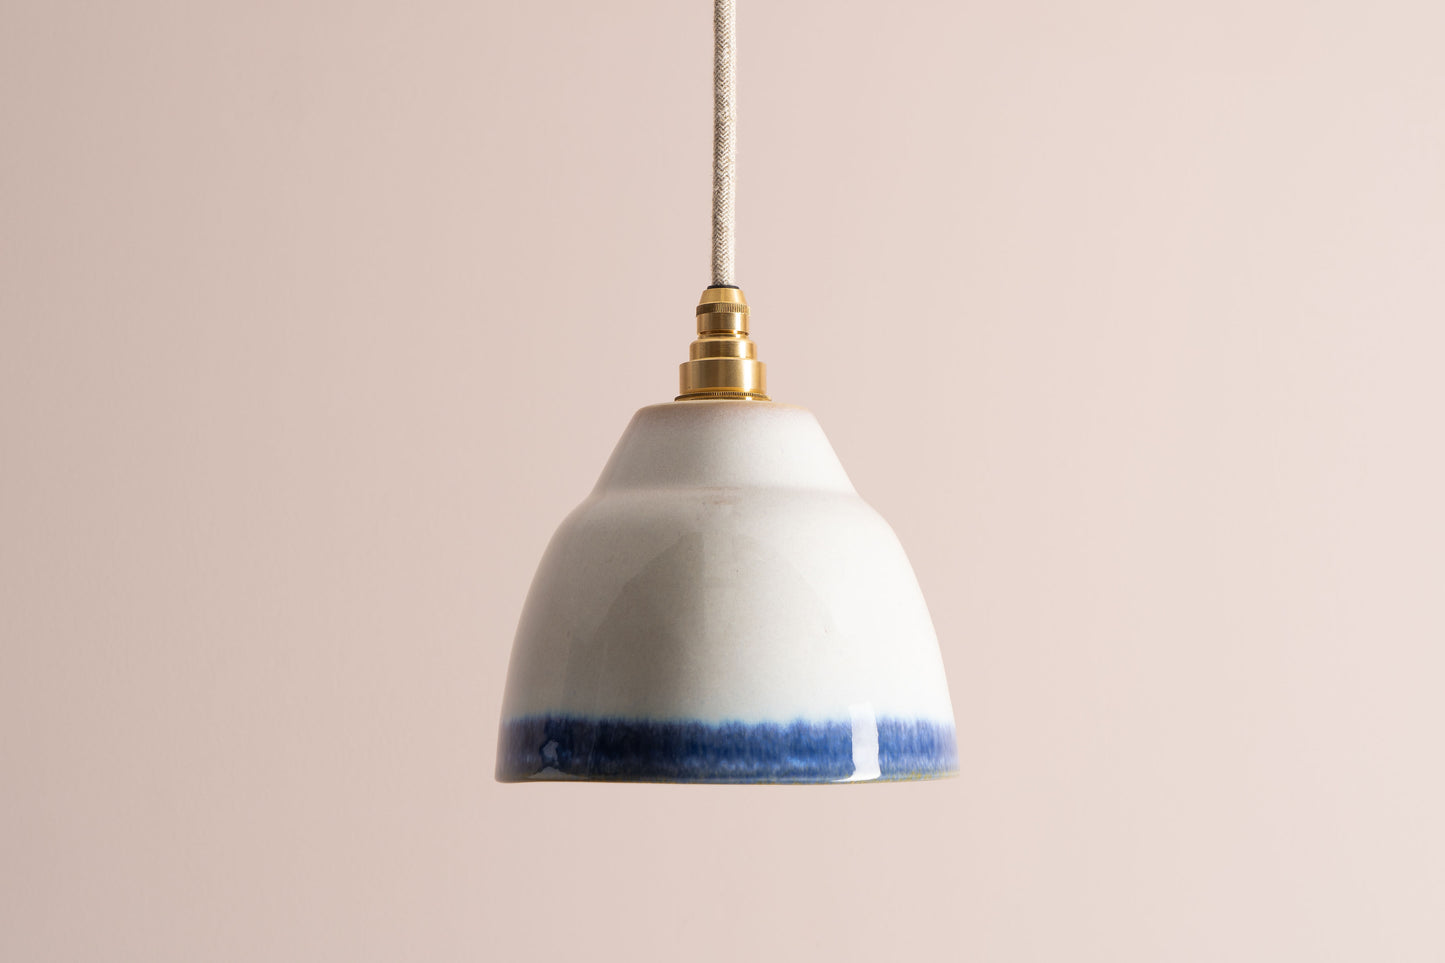 Small Element Pendant Light in Ceramic and Brass [OUTLET]